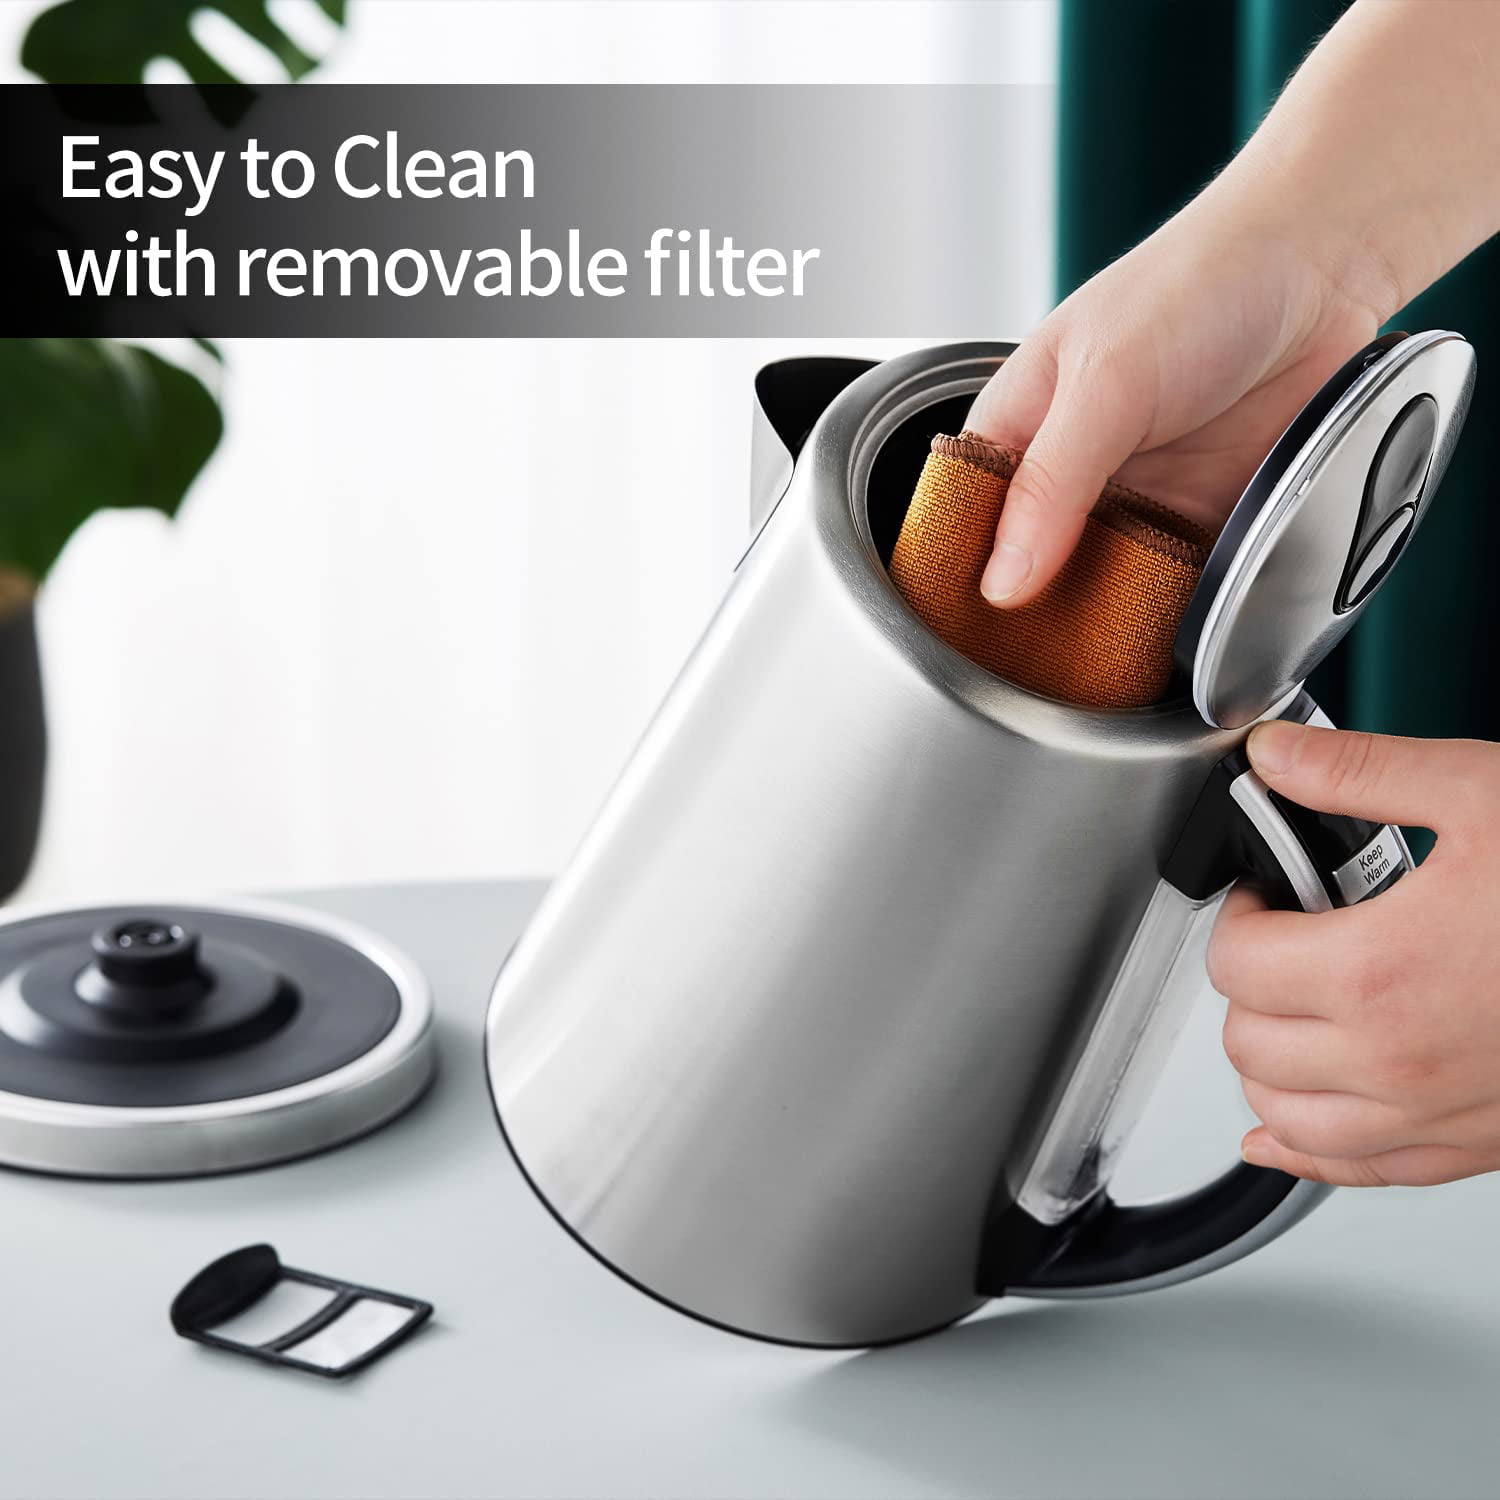 Smart Electric Kettle $57.45 Shipped